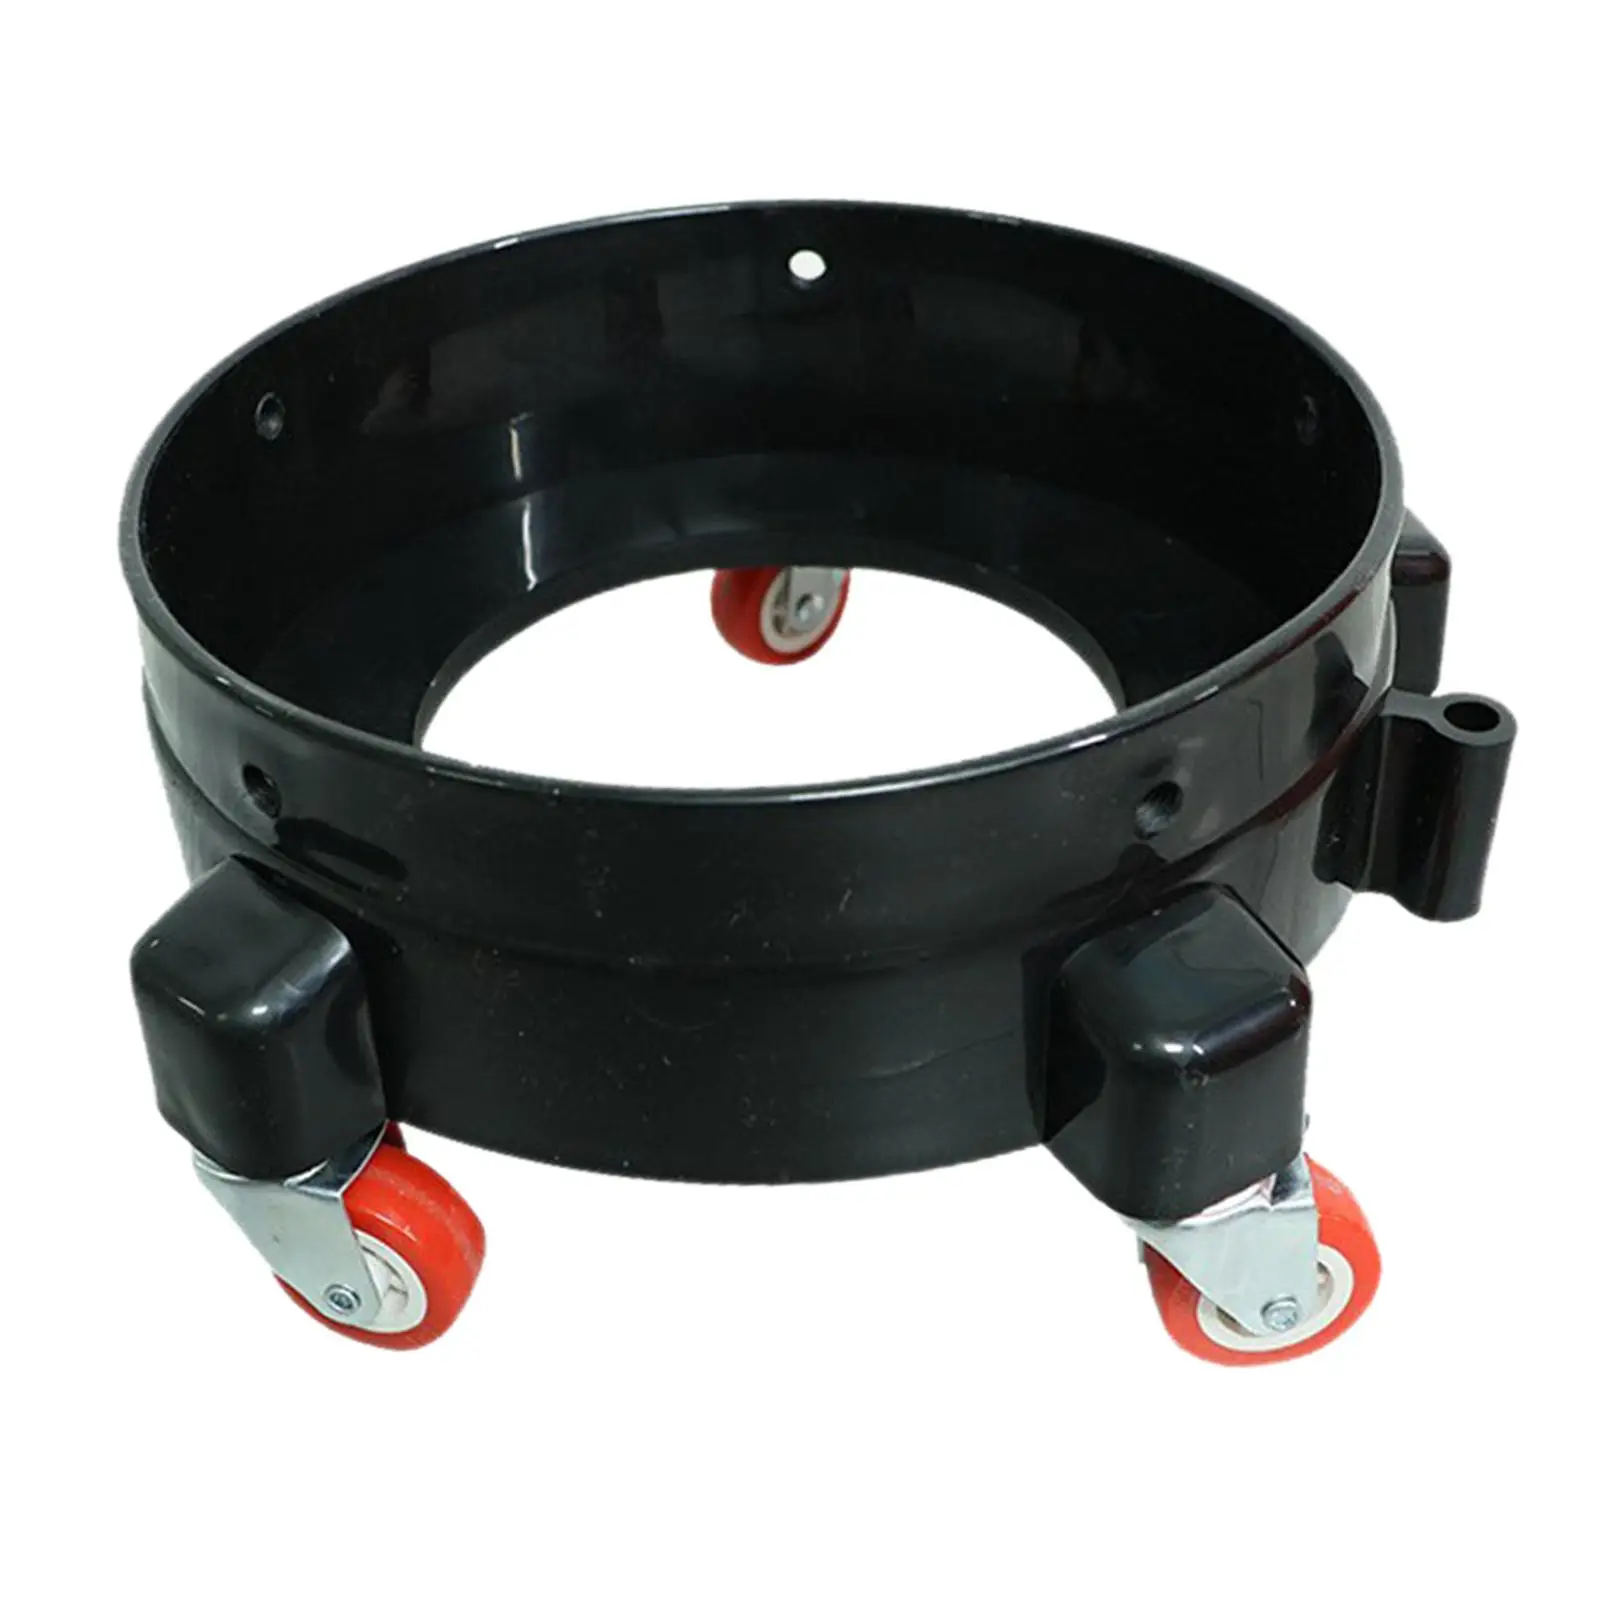 

Car Wash Rolling Bucket Dolly Easy Push Swivel Casters for Detailing Construction Workers Cleaners Schools Building Workers